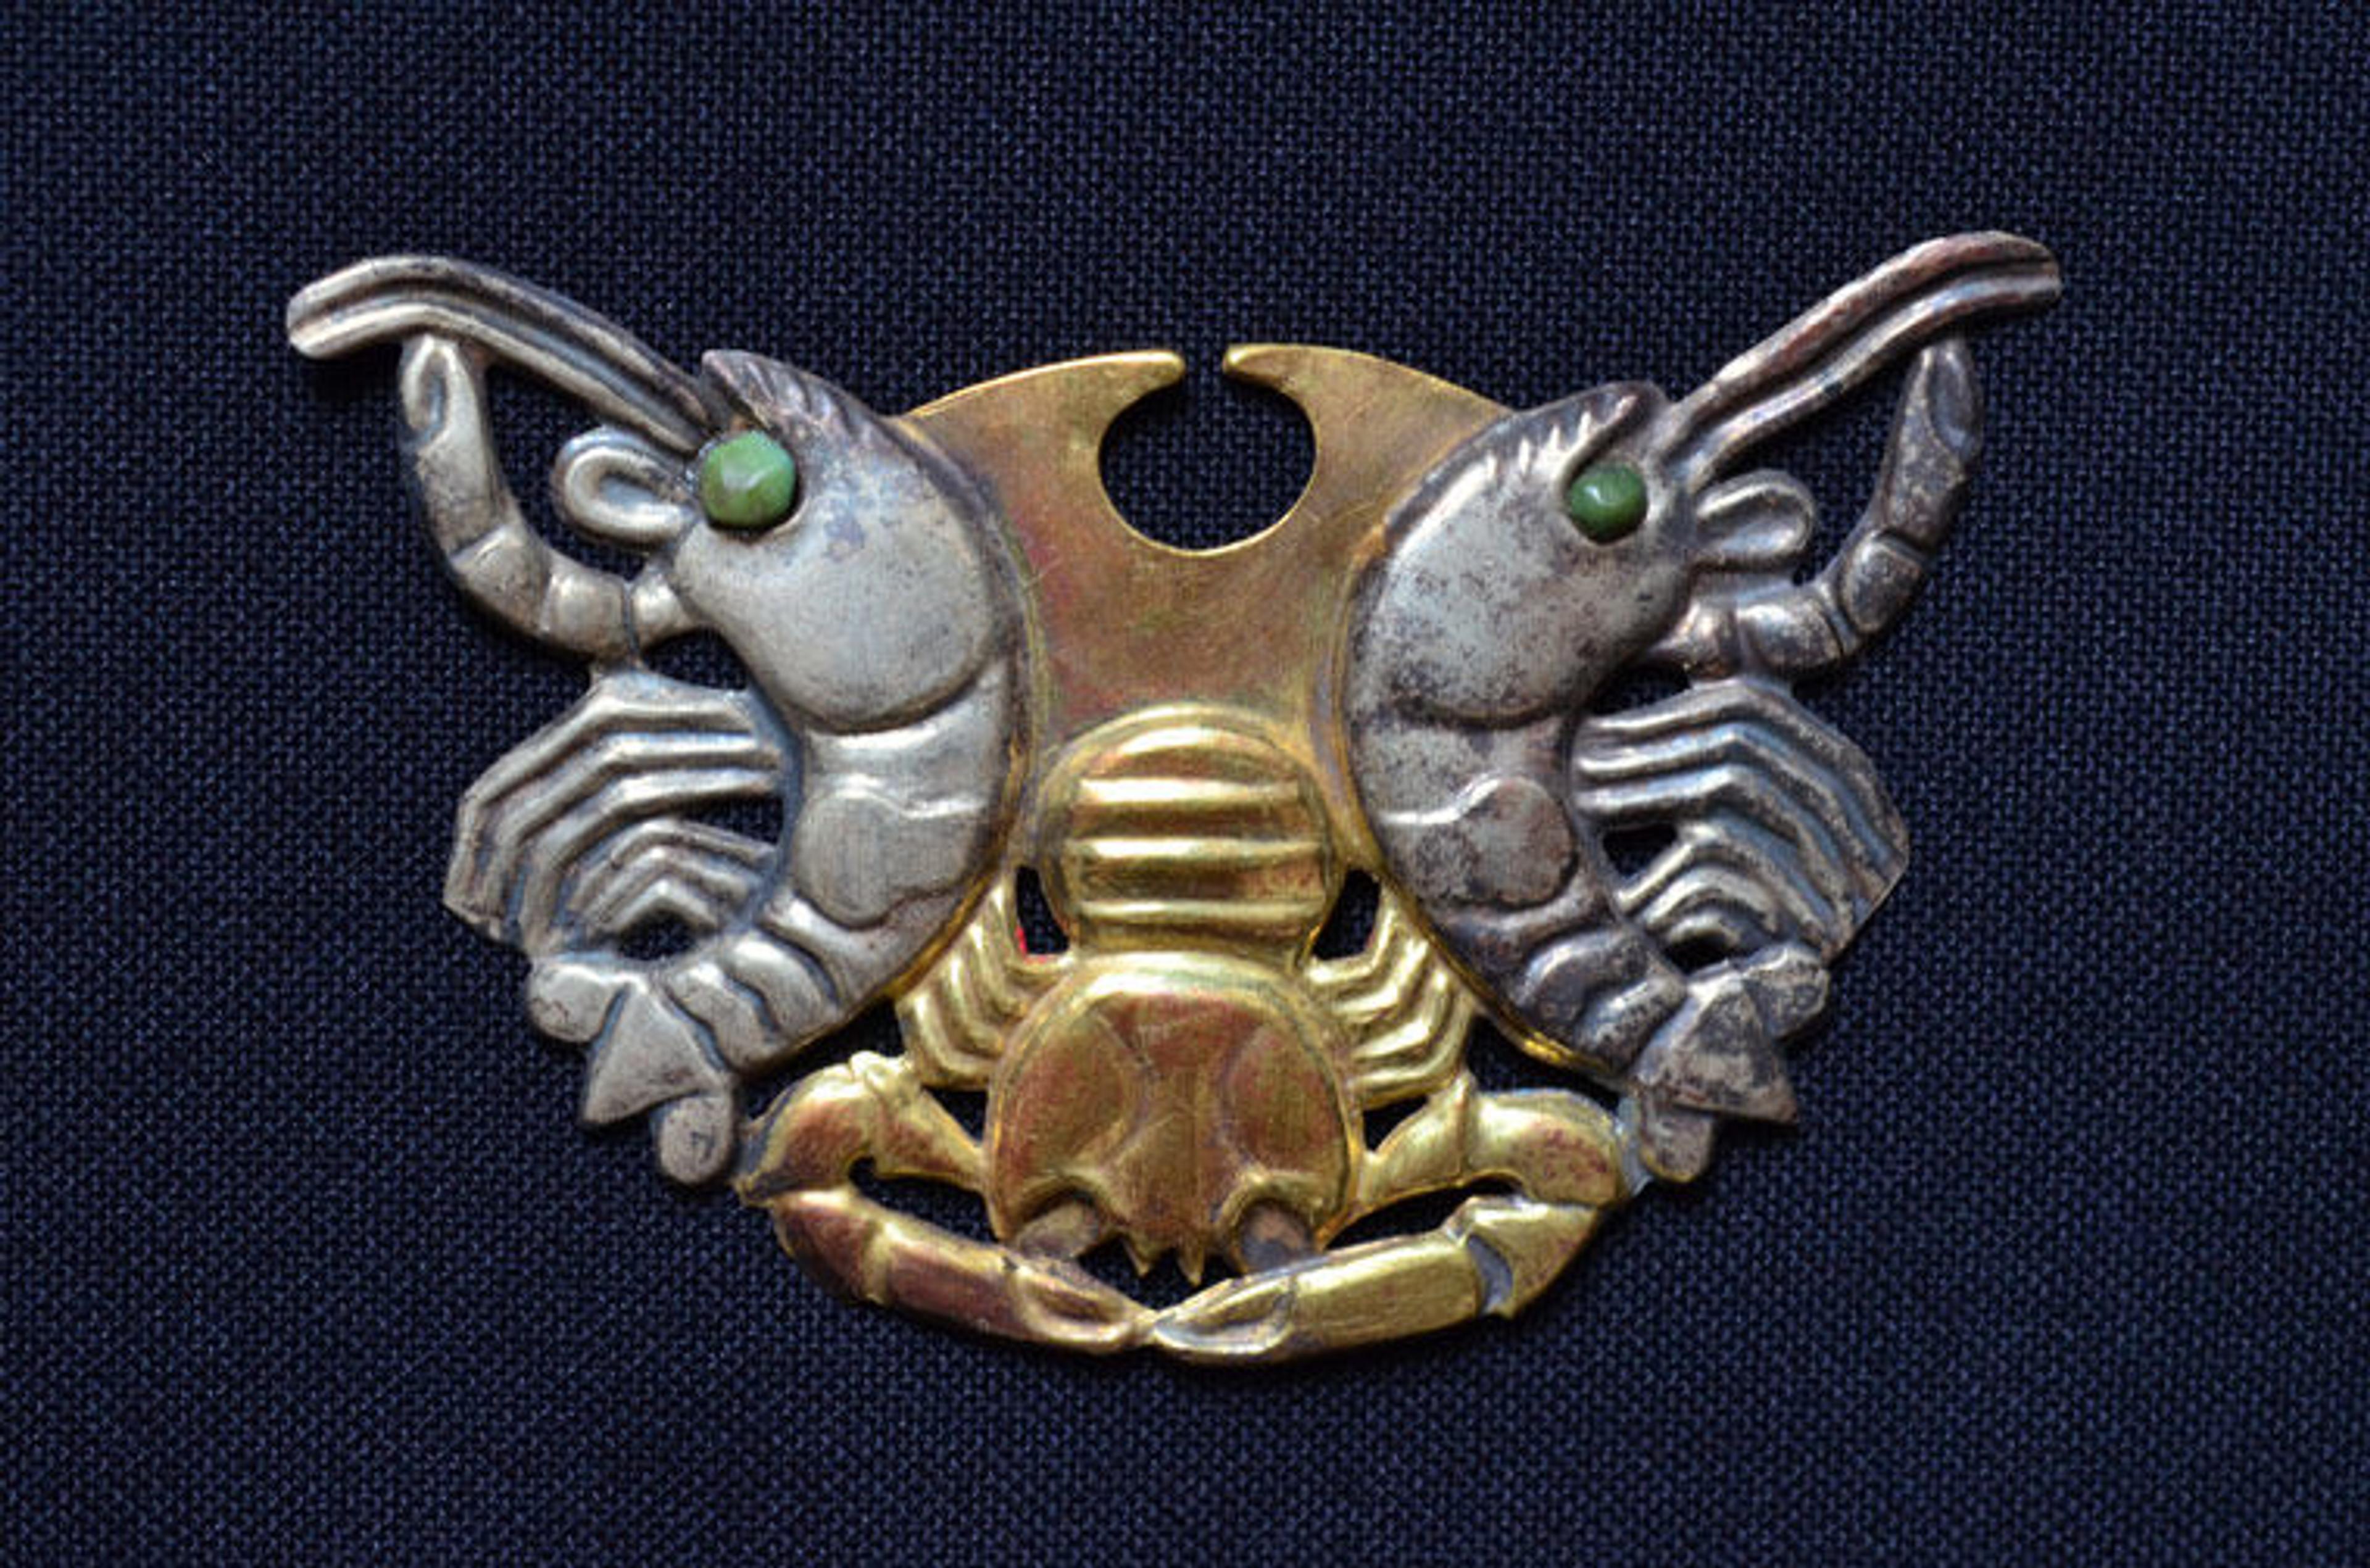 A nose ornament from fifth-century Peru in the shape of two crustaceans 